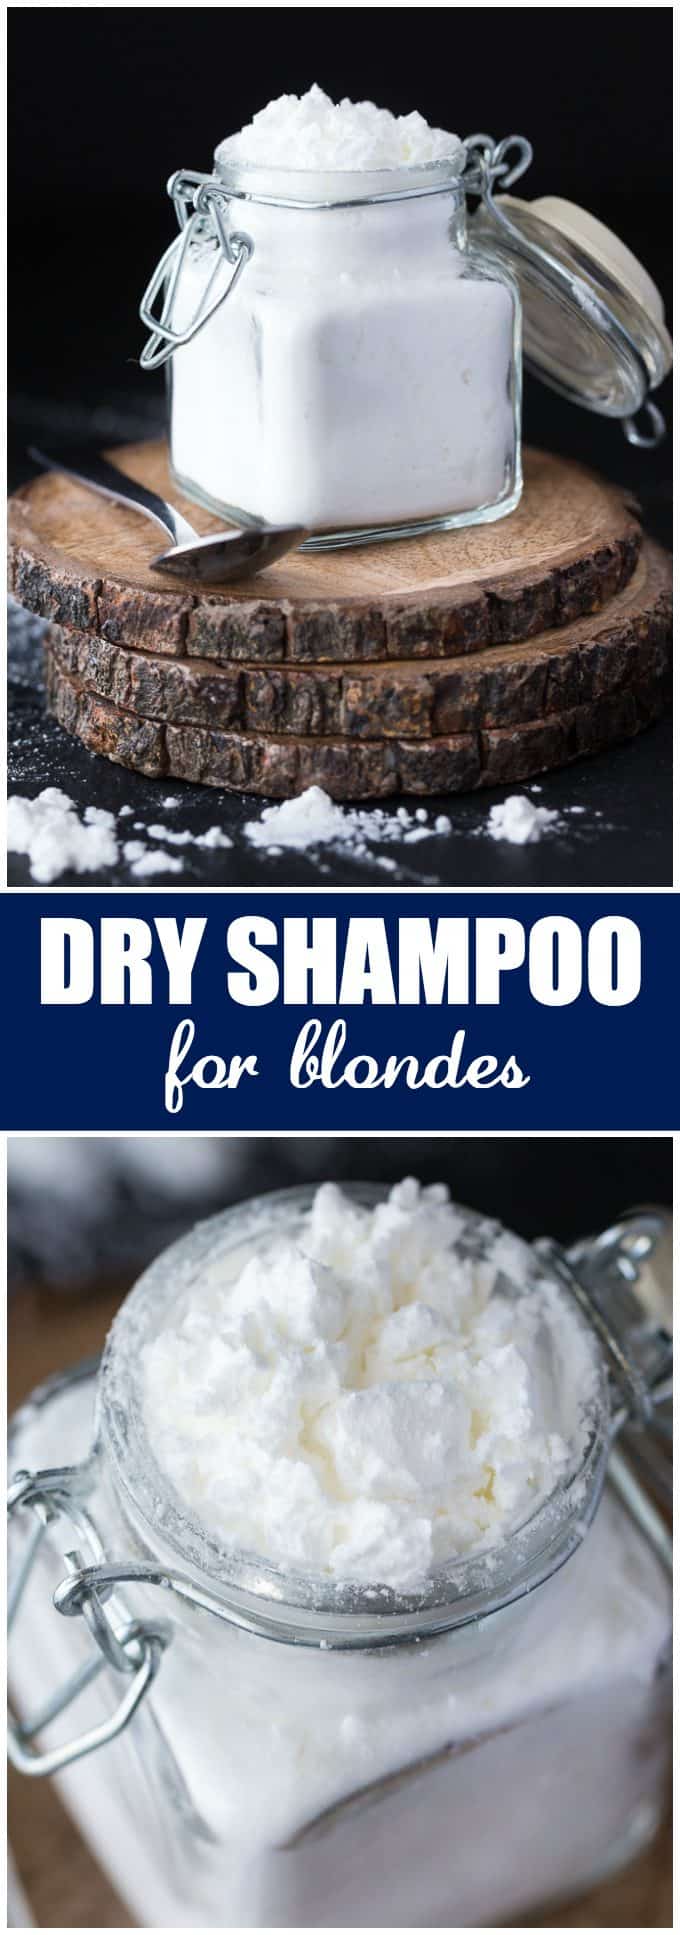 Dry Shampoo for Blondes - This easy DIY absorbs excess oil, adds volume and makes hair easy to style. It also hides dark roots!